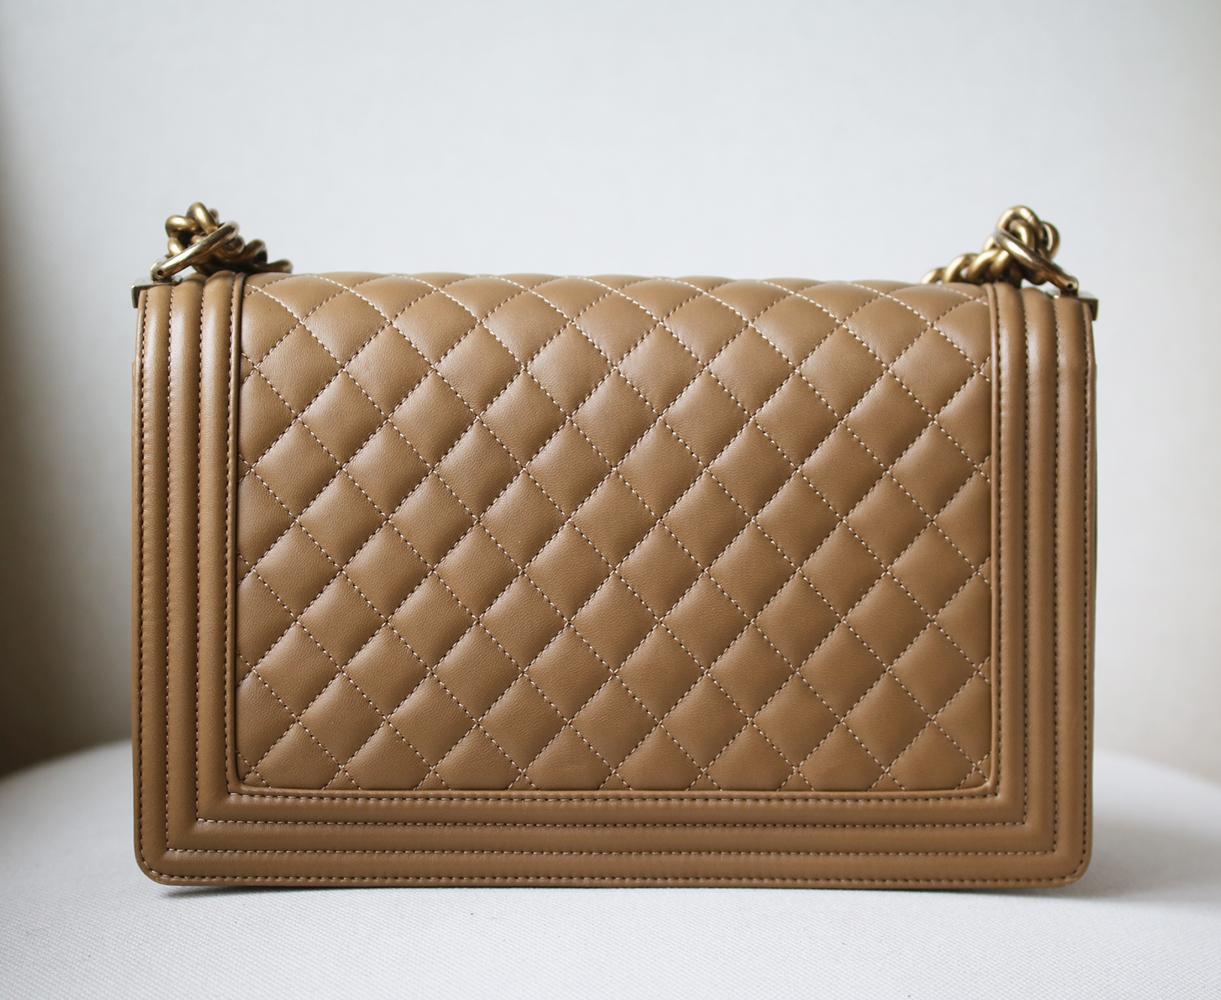 Women's Chanel Boy Quilted Lambskin Leather Crossbody Bag